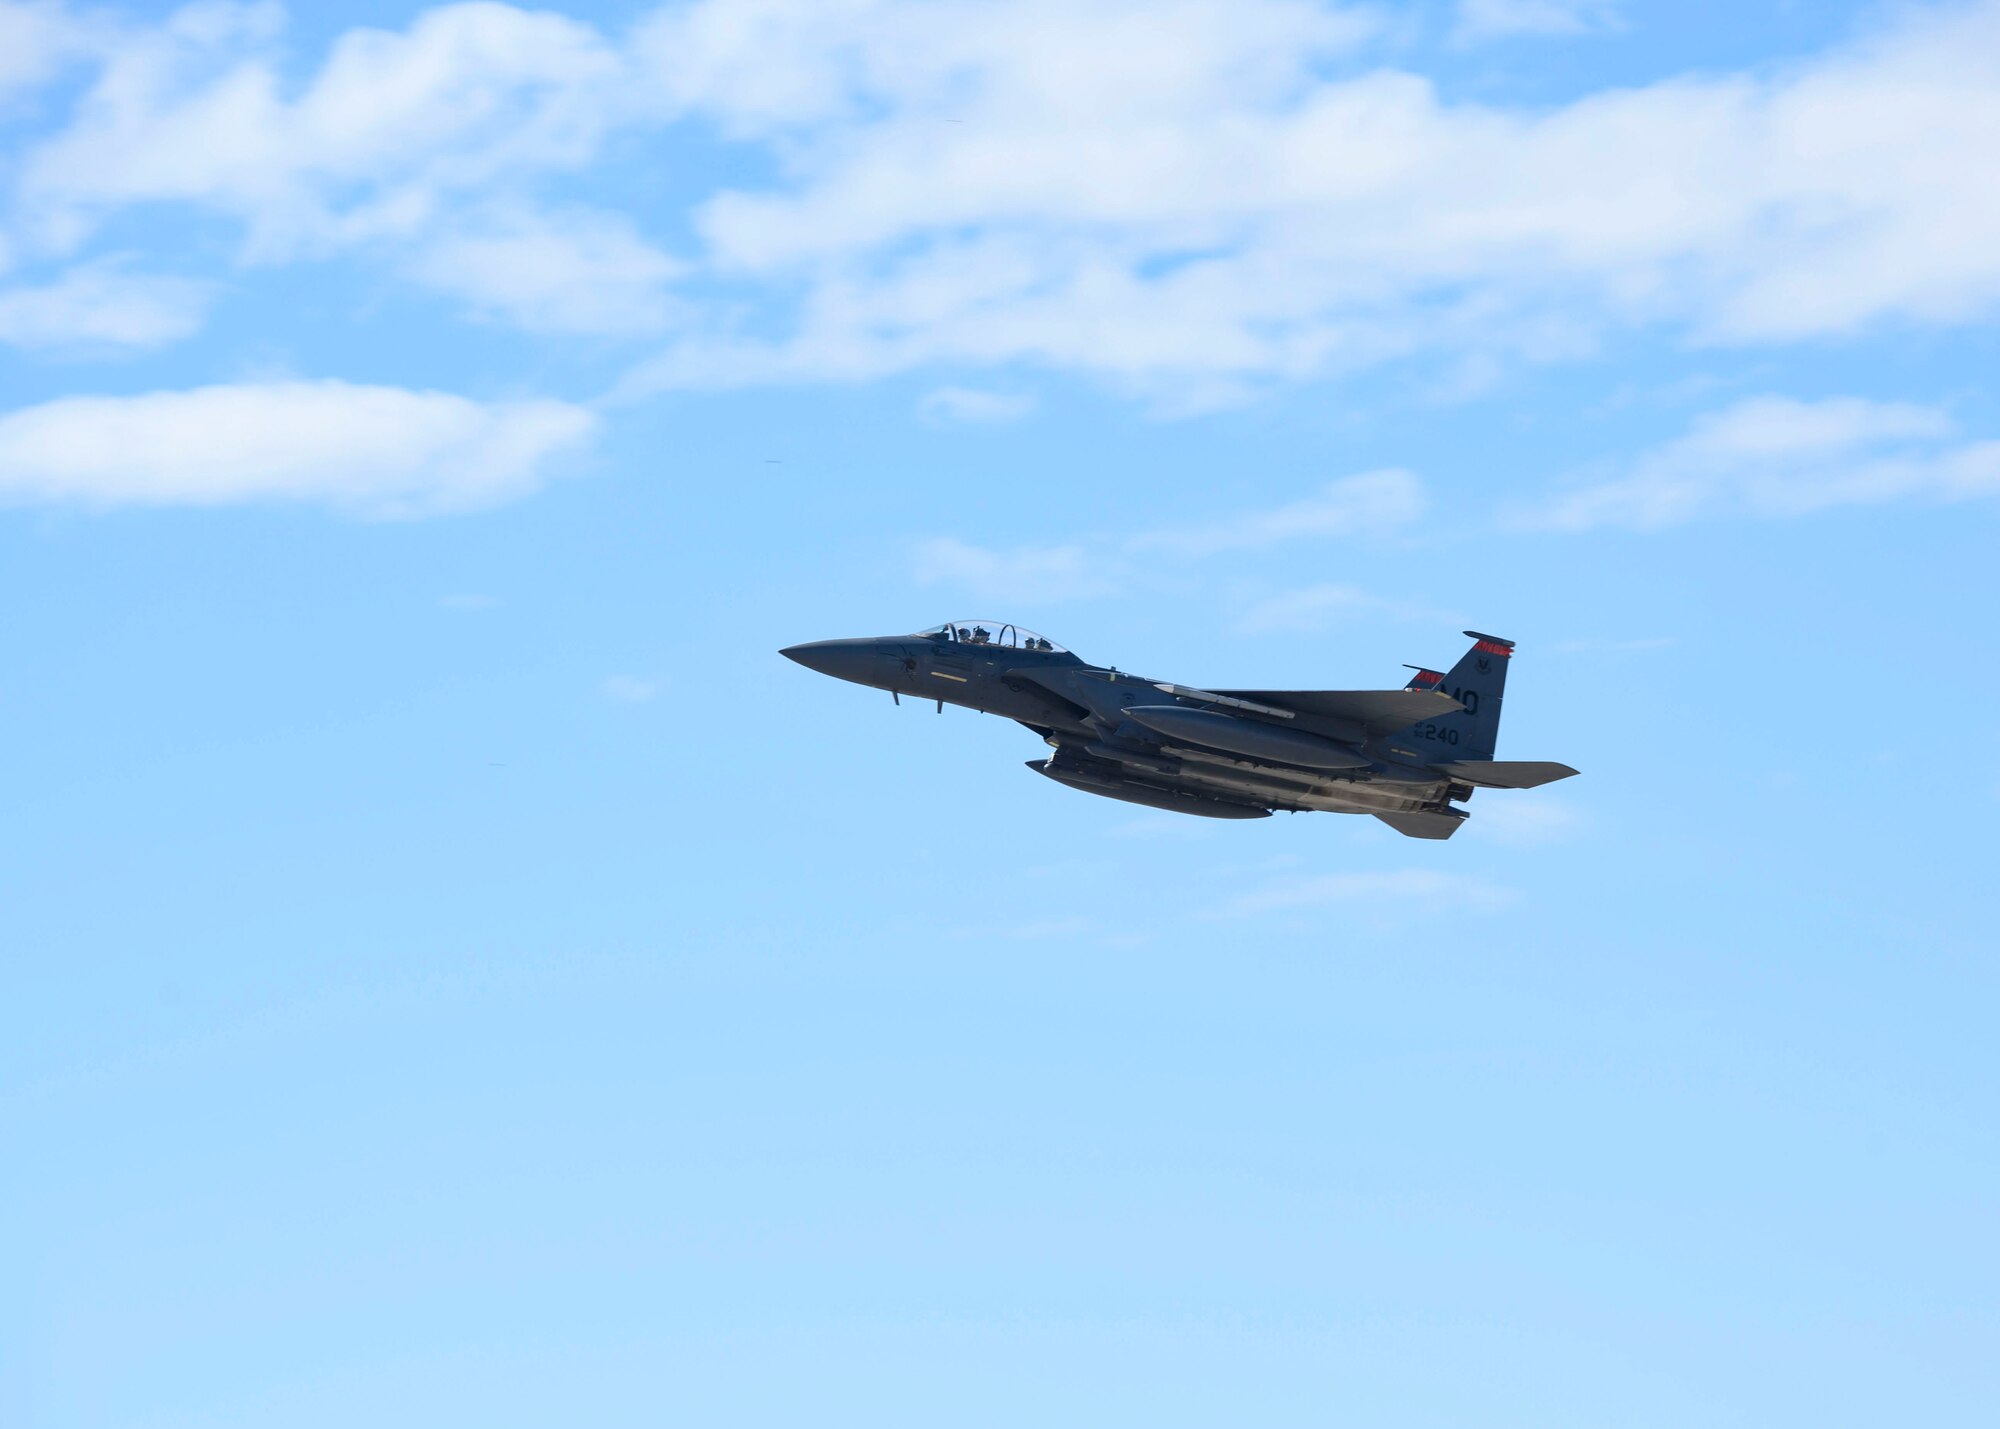 An F-15E Strike Eagle from the 391st Fighter Squadron takes off during a flight exercise, March 16, 2020, at Mountain Home Air Force Base. The Gunfighters are maintaining their total force efforts in the midst of schedule changes due to COVID-19. (U.S. Air Force photo by Senior Airman Tyrell Hall)